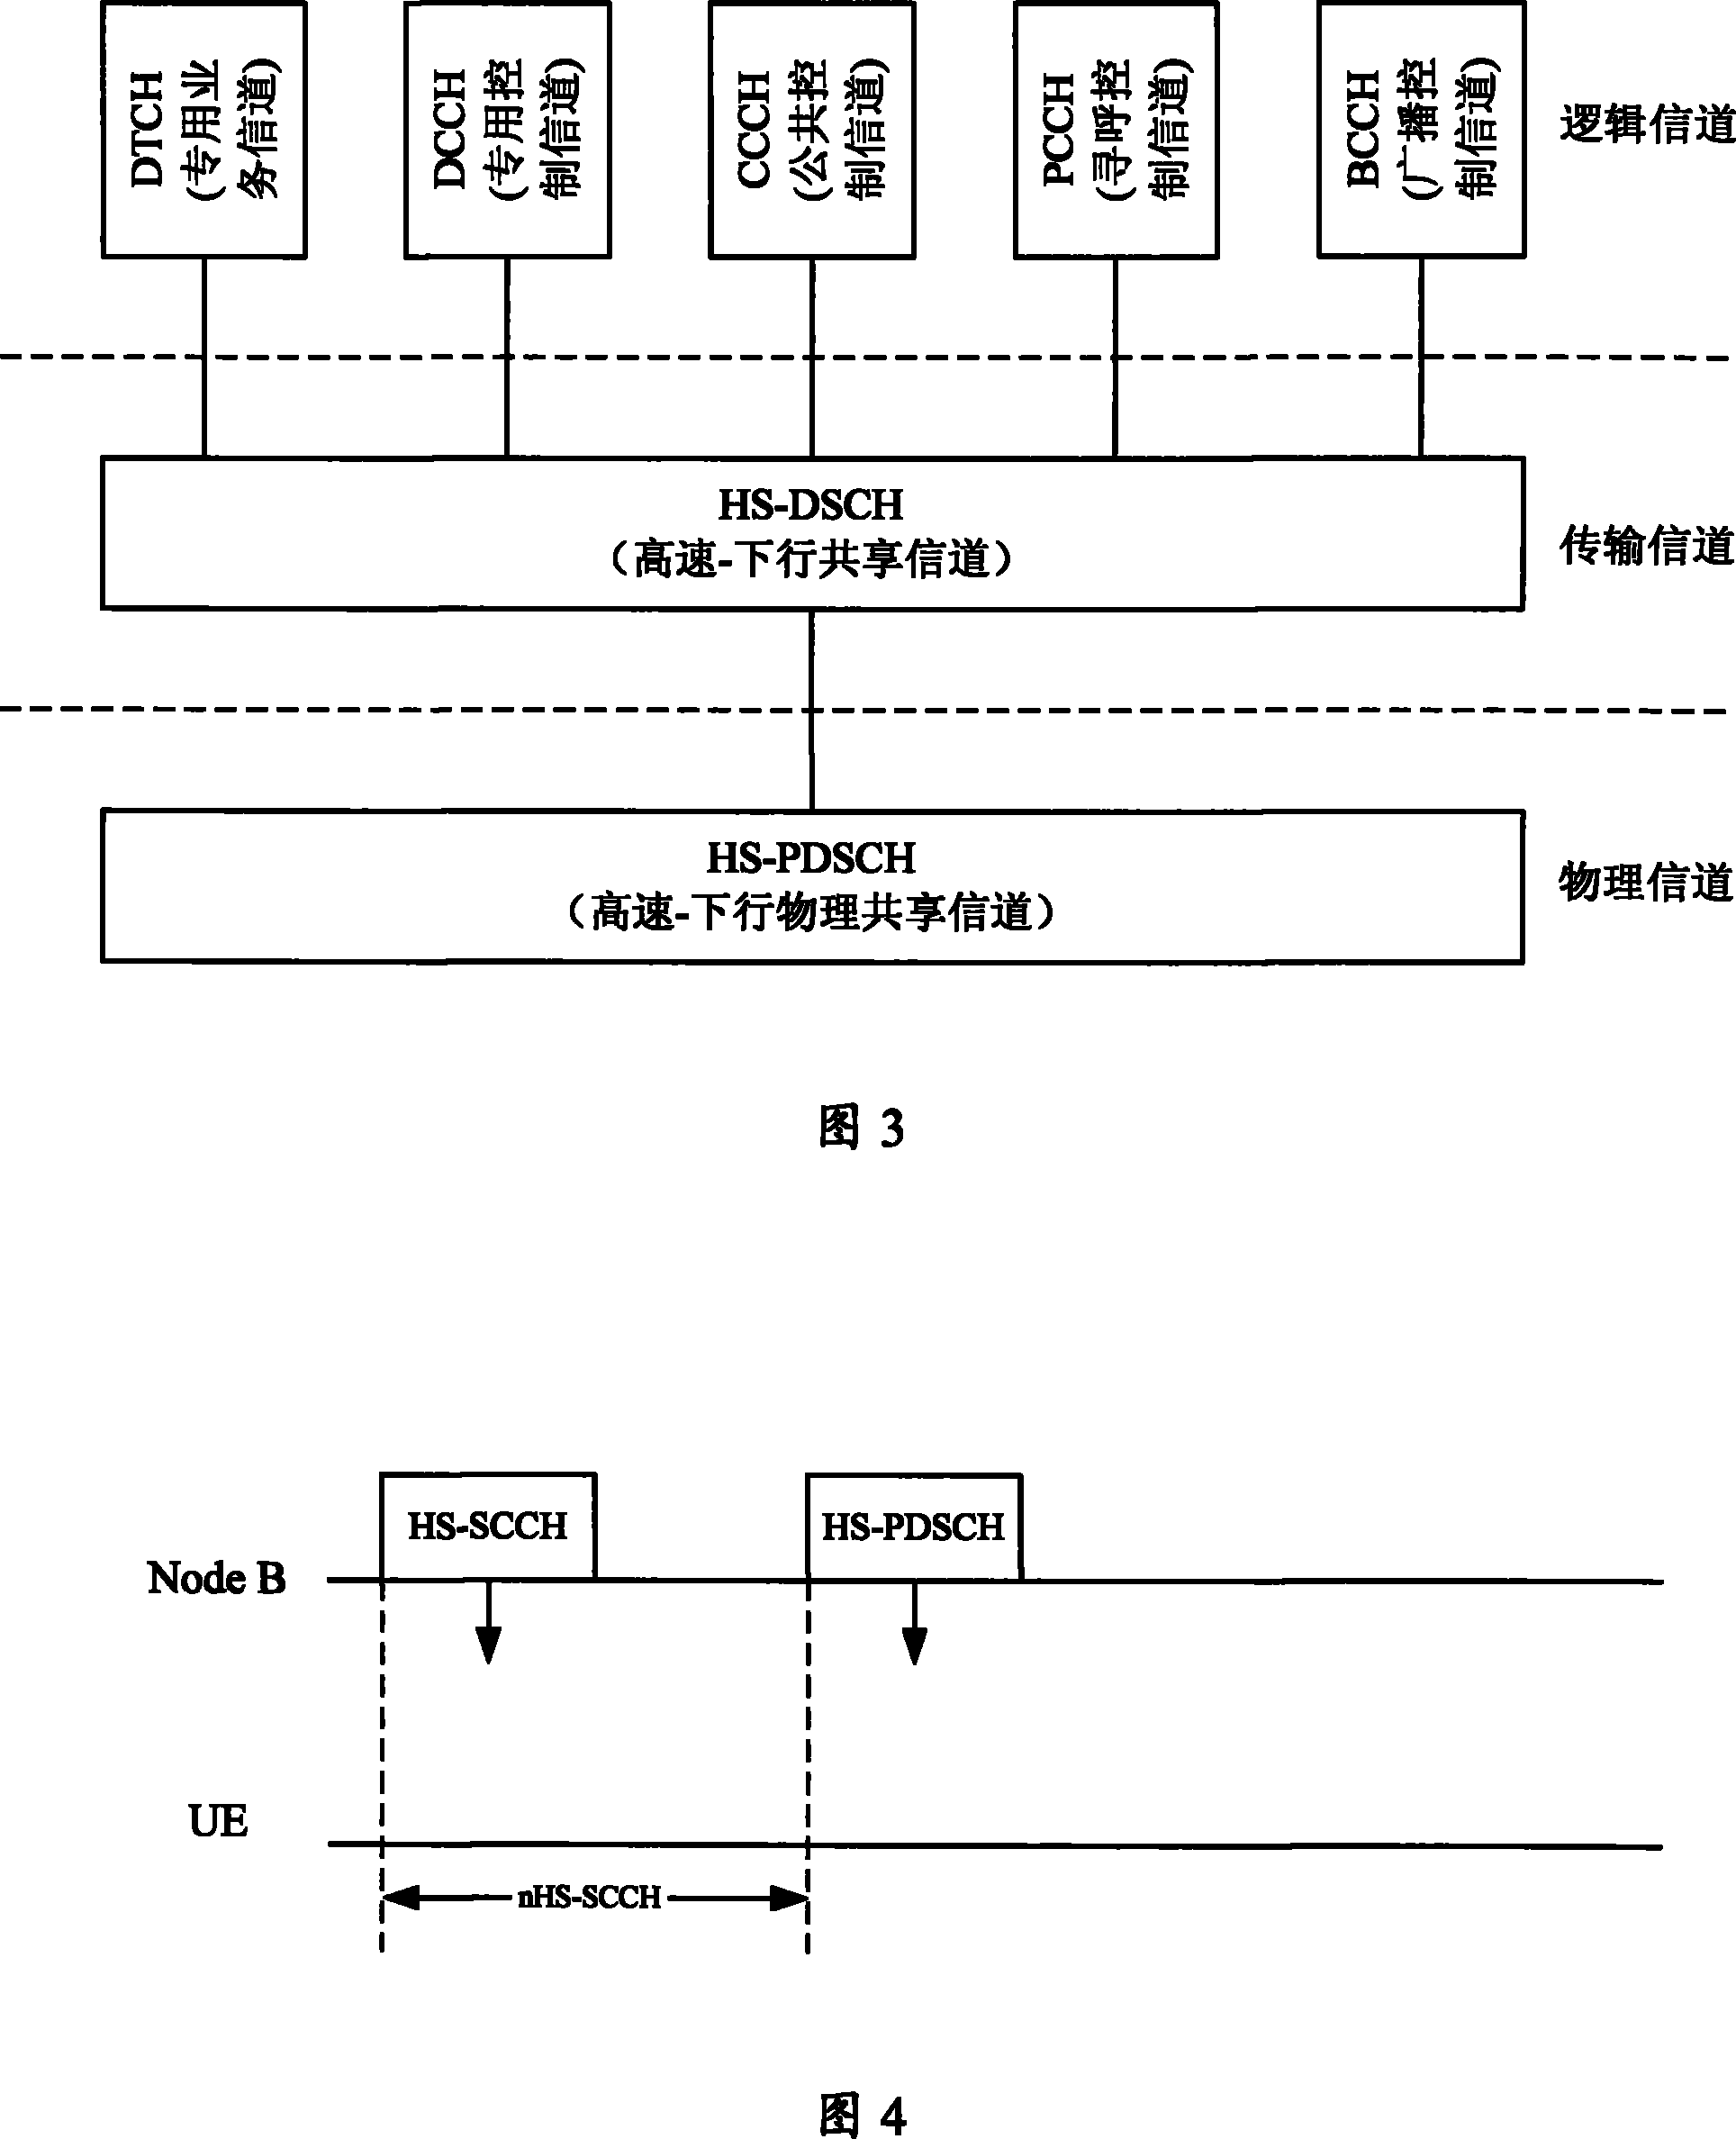 Transmission method for high-speed downlink shared channel under non-CELL_DCH state